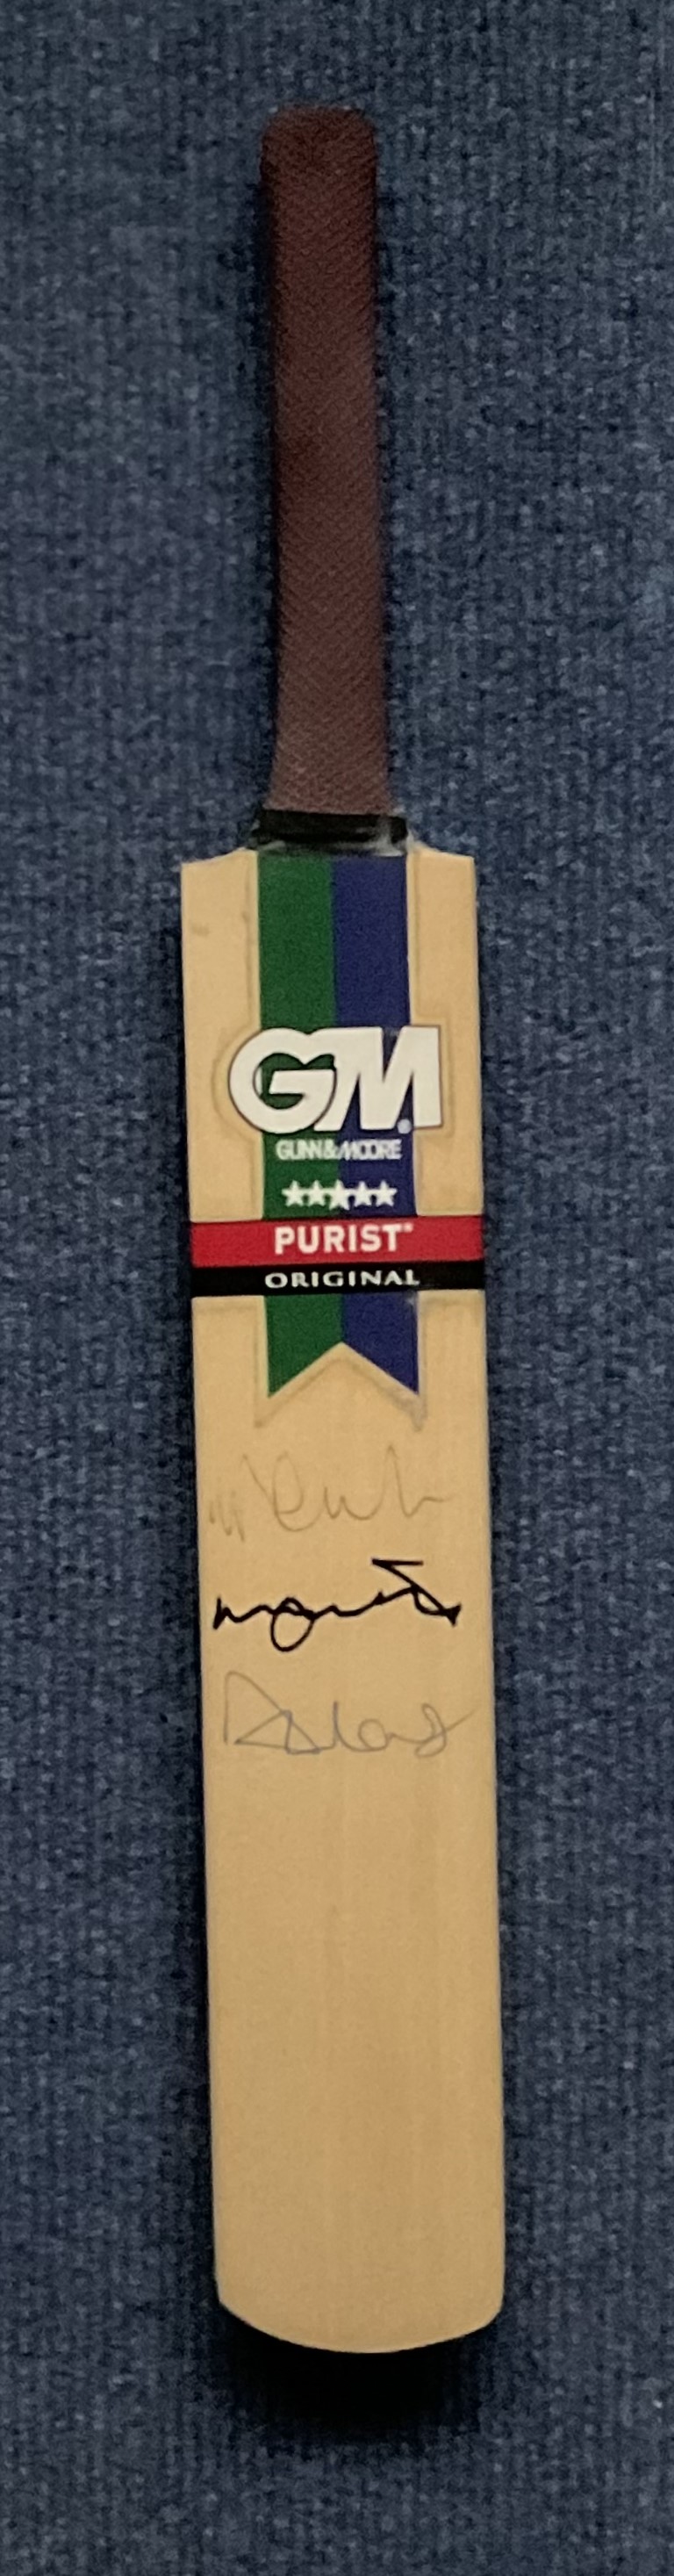 Michael Vaughan and Marcus Trescothick and 1 other Signed Gunn and Moore Small Cricket Bat. Good